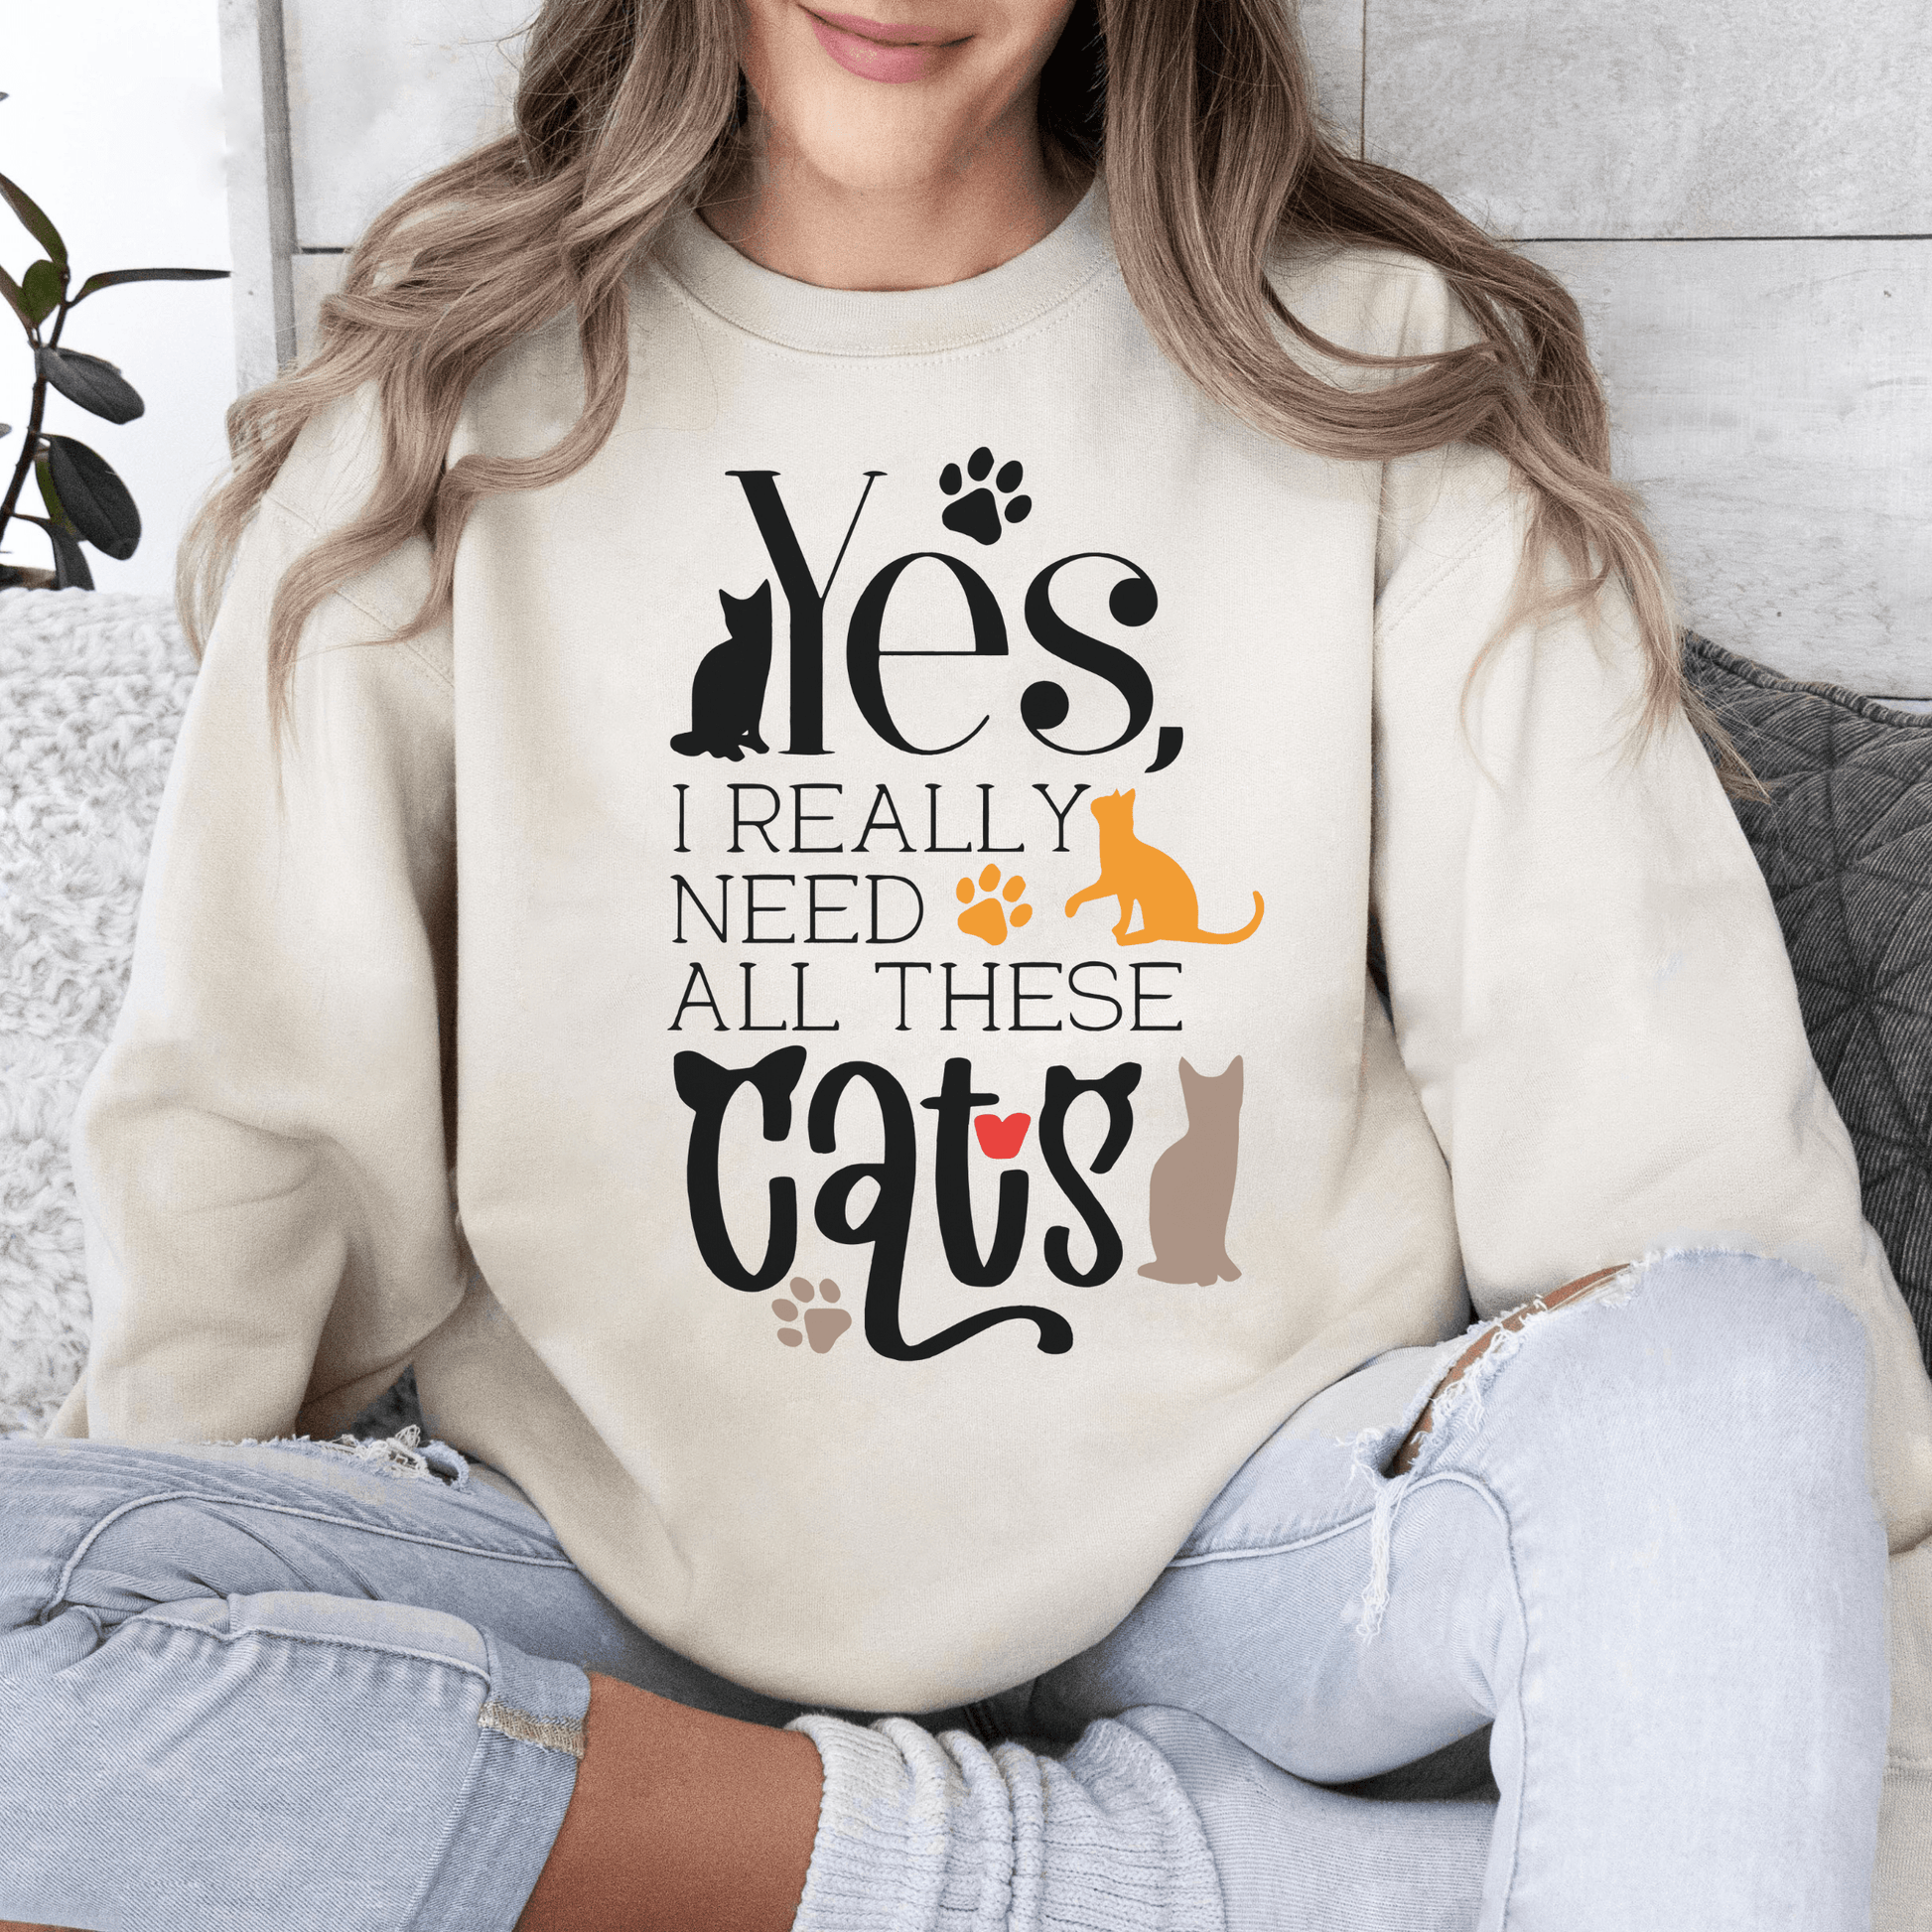 Of Course I Need All These Cats, Perfect for Cat Moms - GiftHaus